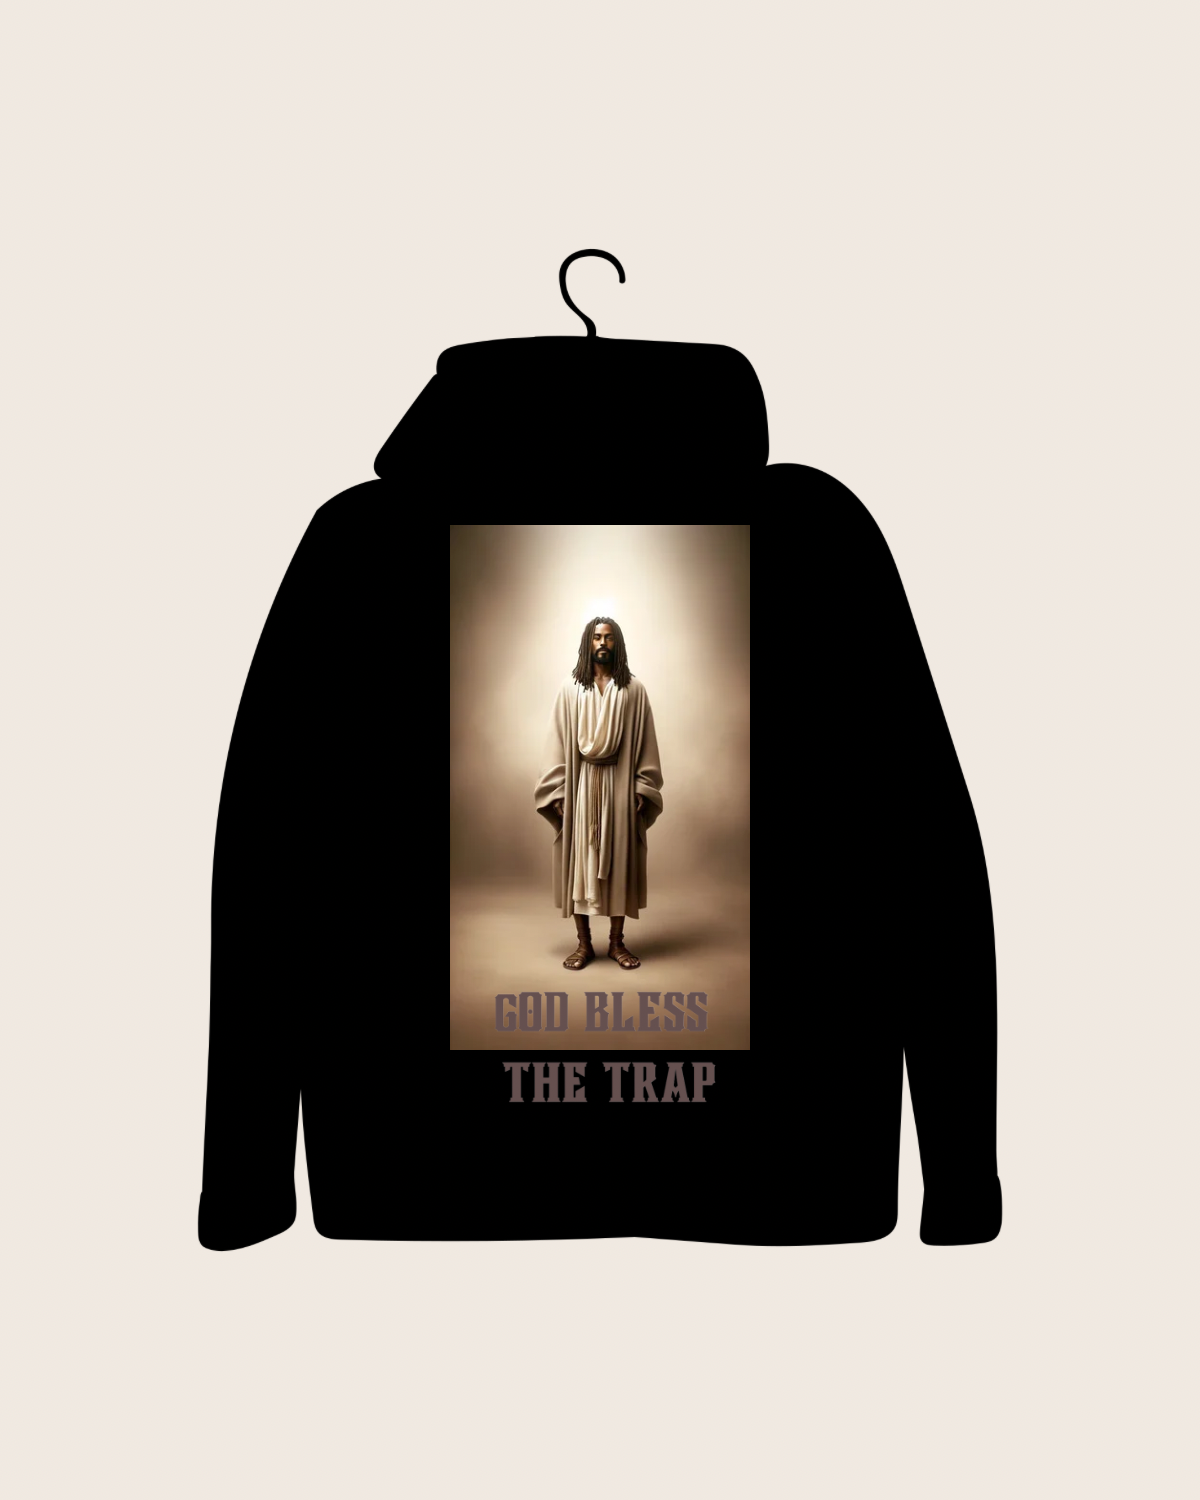 God Bless the Trap, Black Oversized, Heavy Cotton Blend, Black Jesus, Free the Trappers Merch, Crenshaw District, Puff lettering, Neutral colors